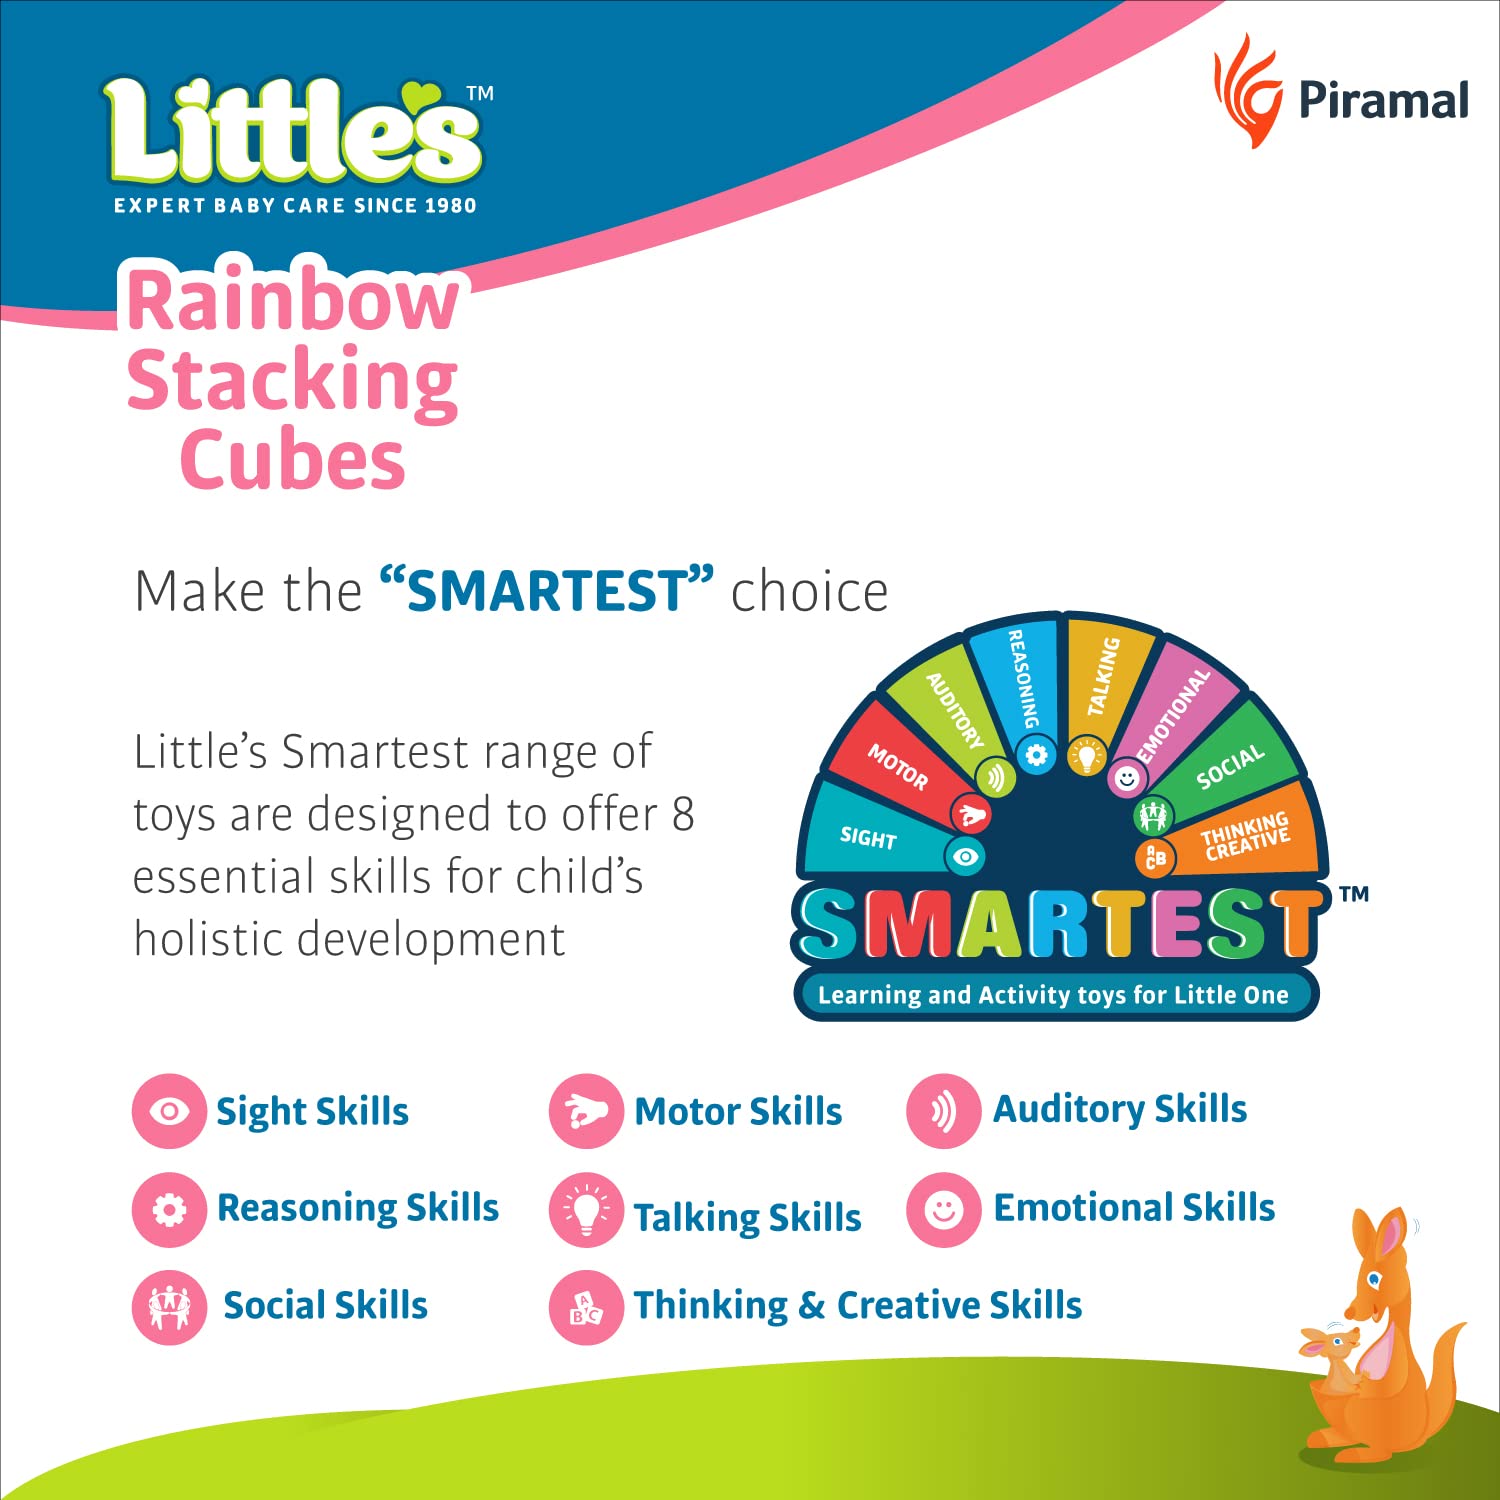 Little's Rainbow Stacking Cubes I Activity toy for babies I Multicolor I Infant & Preschool Toys I Develops motor & Reasoning skills(7 pieces)